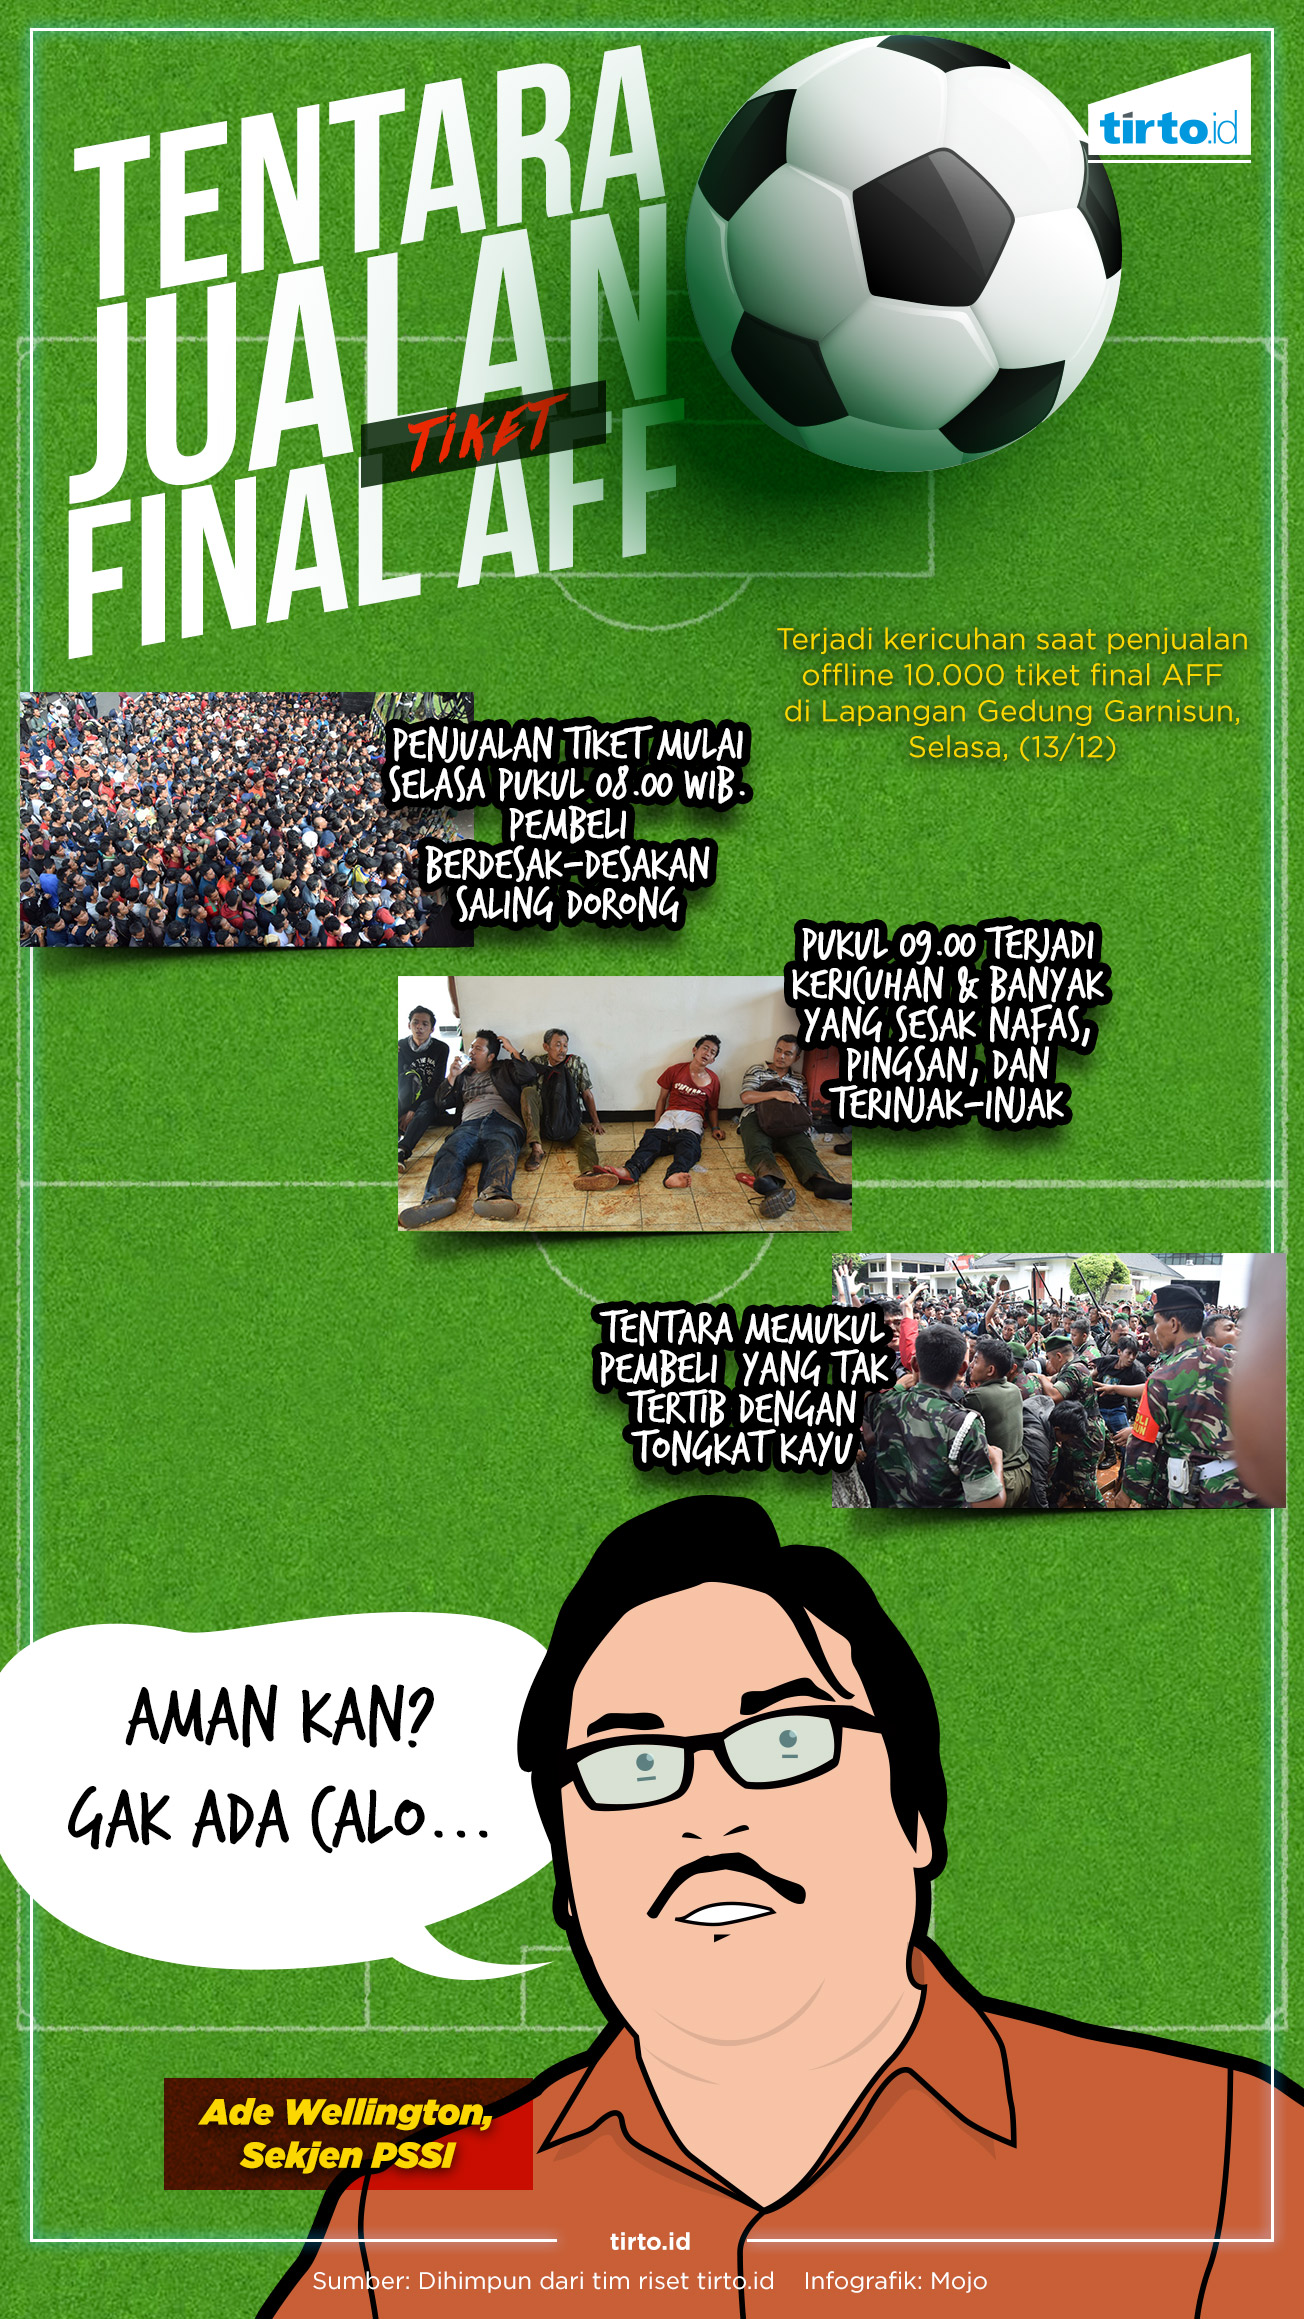 Final AFF Indonesia